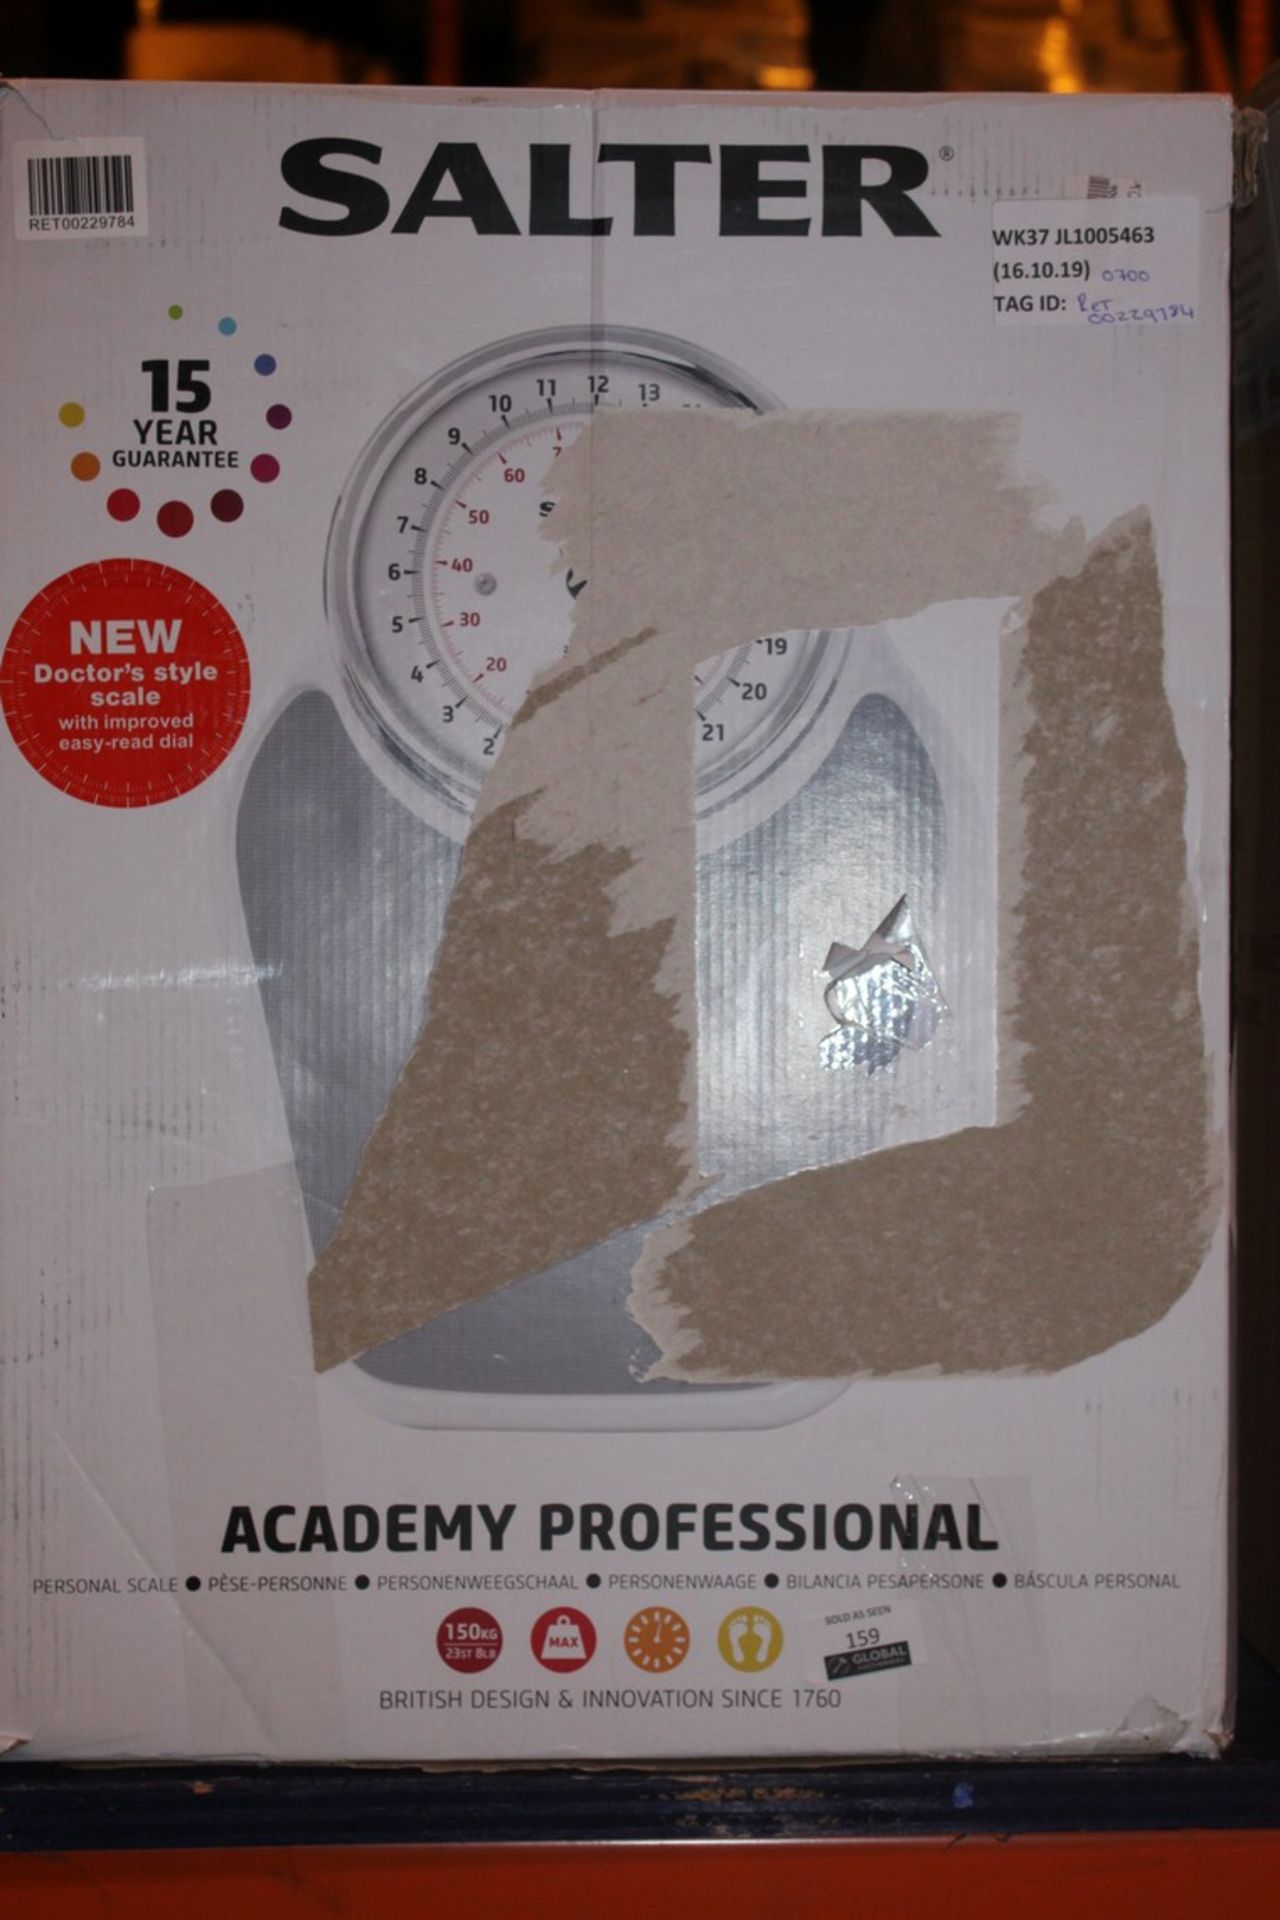 Boxed Salter Academy Professional Weighing Scale RRP £70 (RET00289784) (Public Viewing and